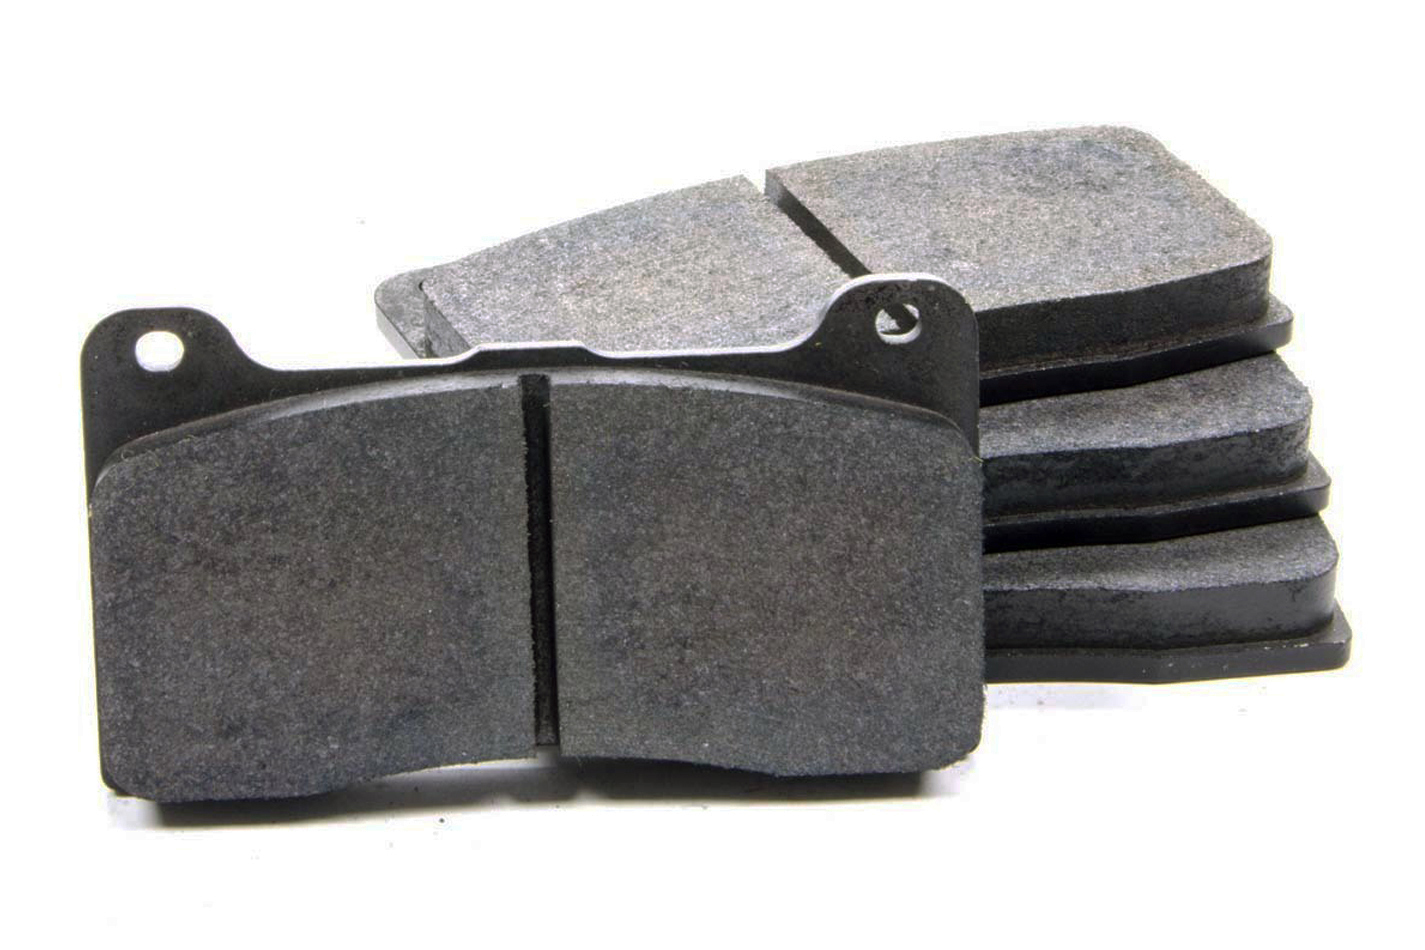 Wilwood 150-12247K Brake Pads, BP-40 Compound, Very High Friction, High Temperature, Dynalite Caliper, Set of 4